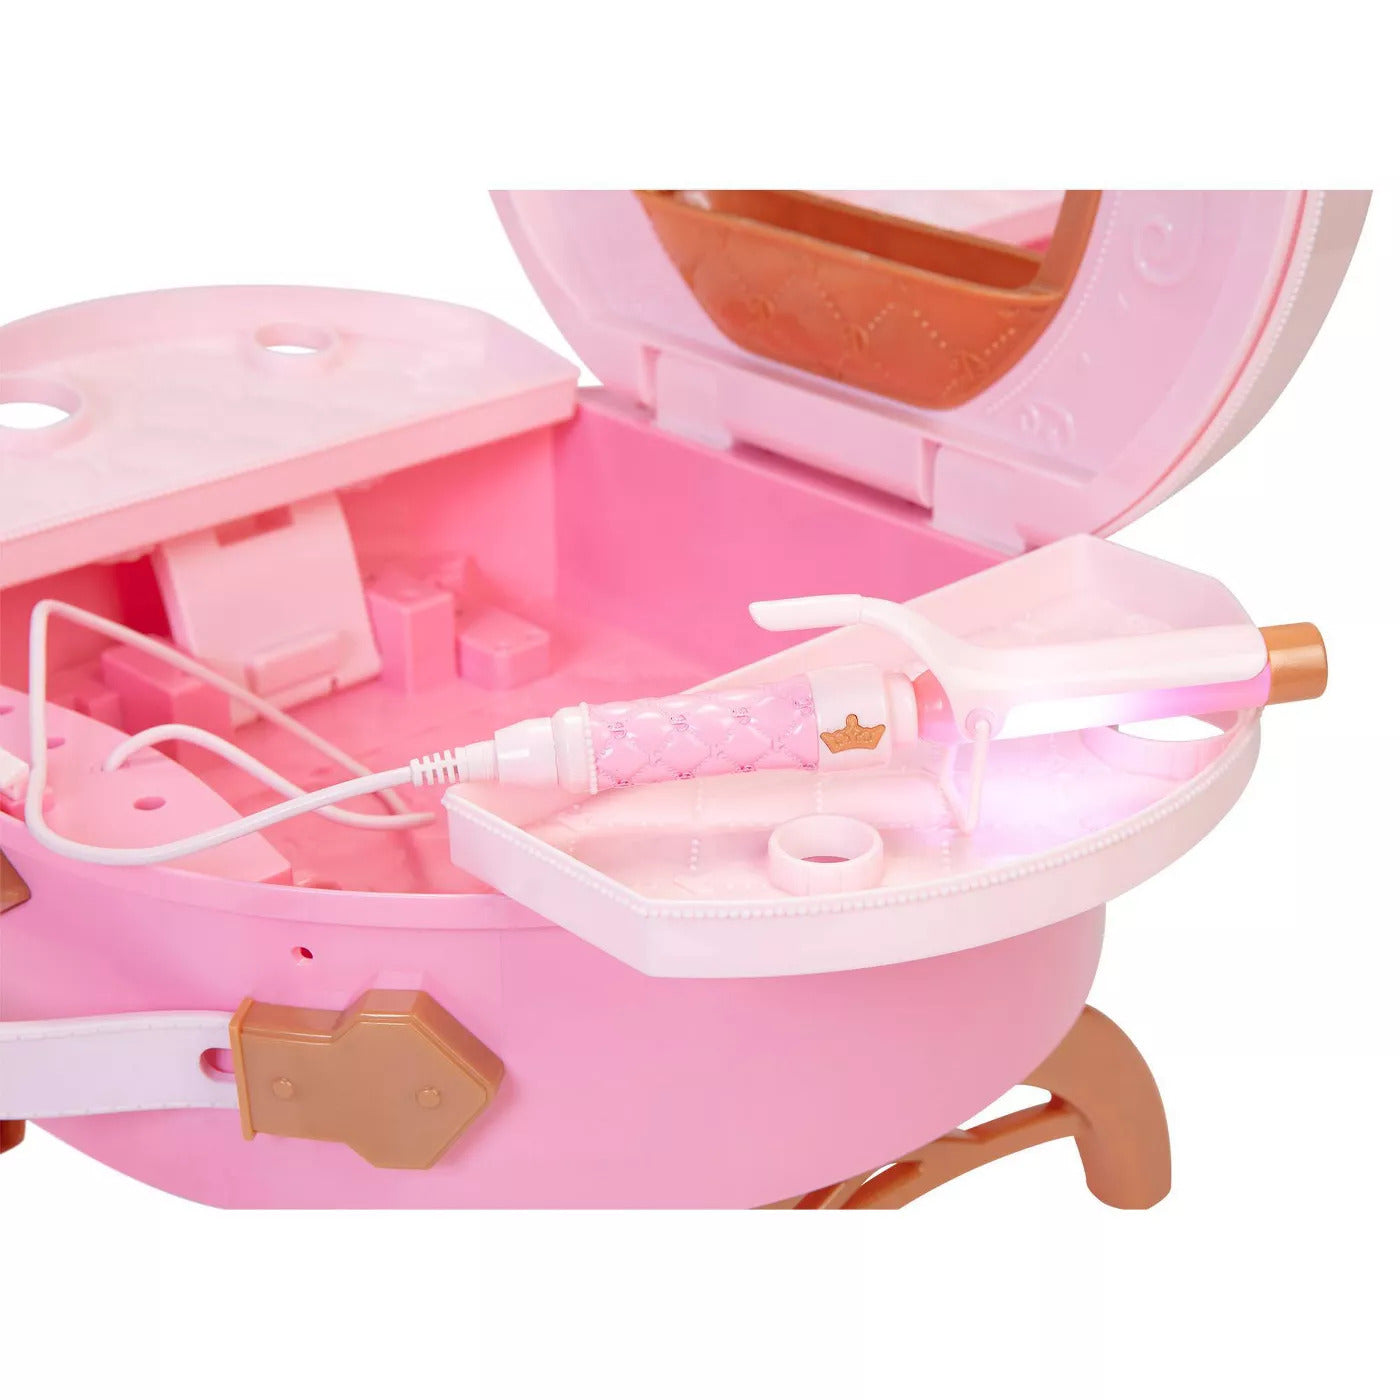 Disney Princess Style Collection - Light Up & Style Vanity